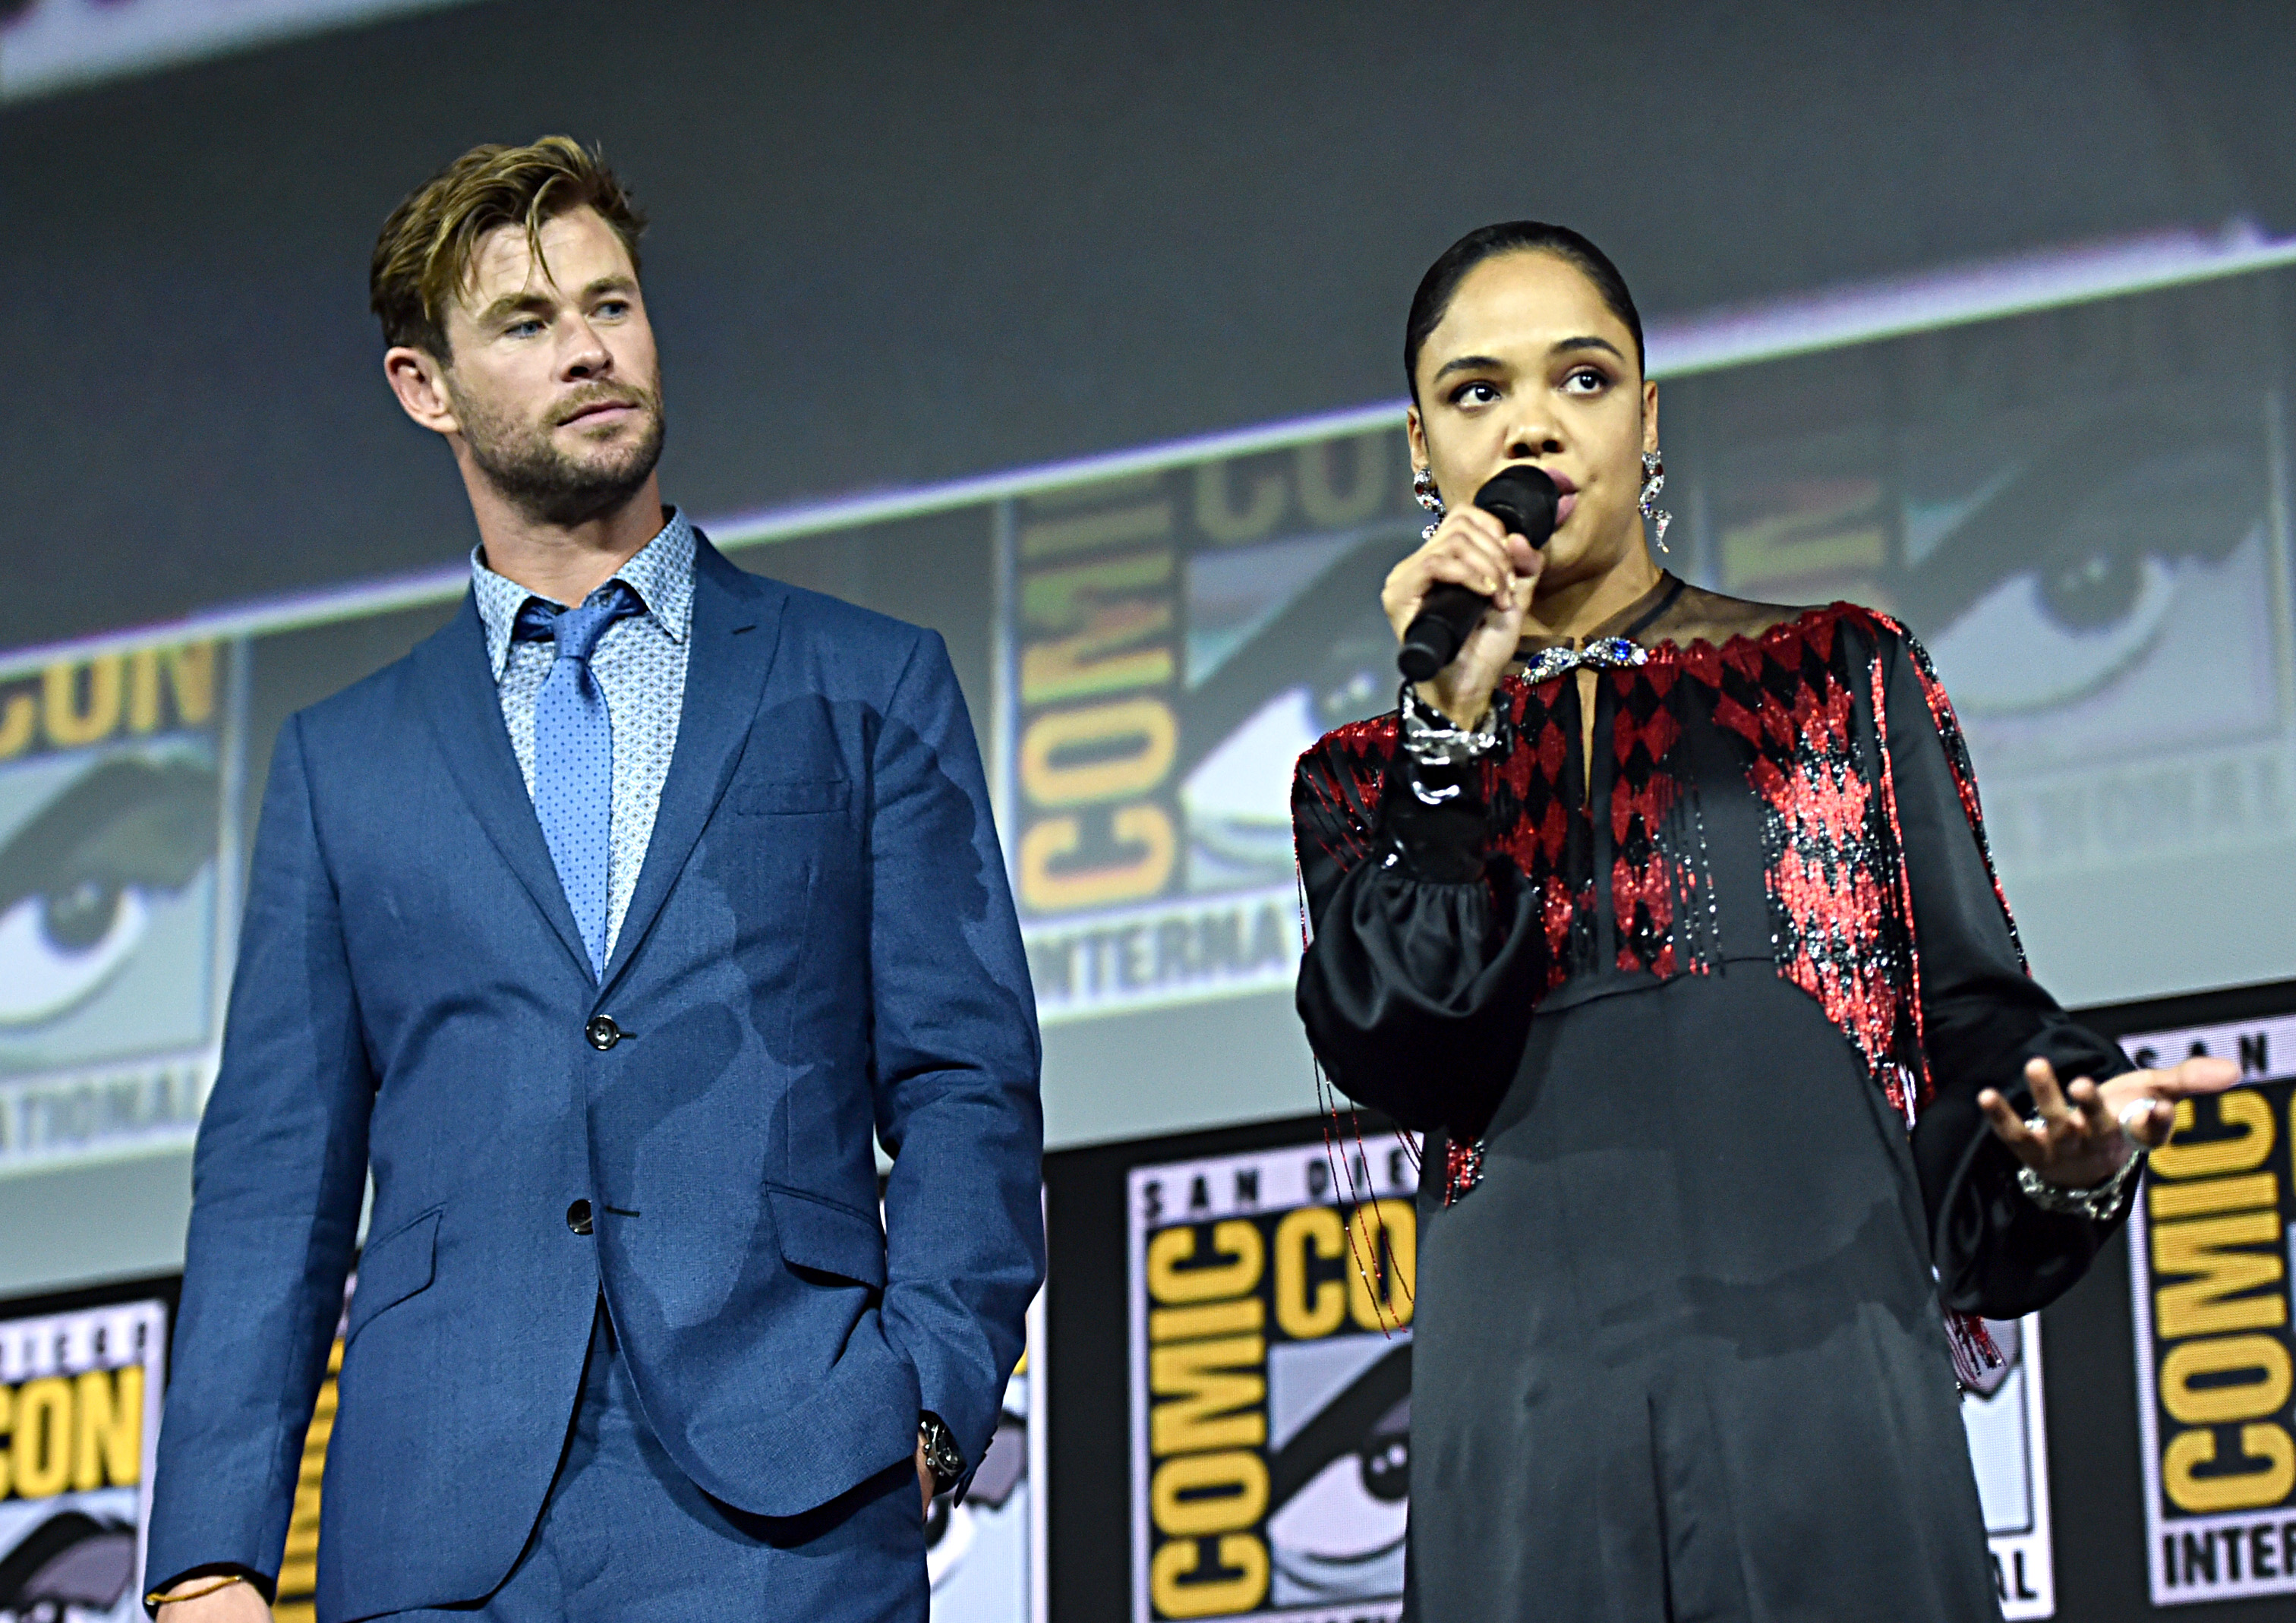 Chris Hemsworth and Tessa Thompson of Marvel Studios’ ‘Thor: Love and Thunder’ at the San Diego Comic-Con International 2019 Marvel Studios Panel in Hall H on July 20, 2019 in San Diego, California.